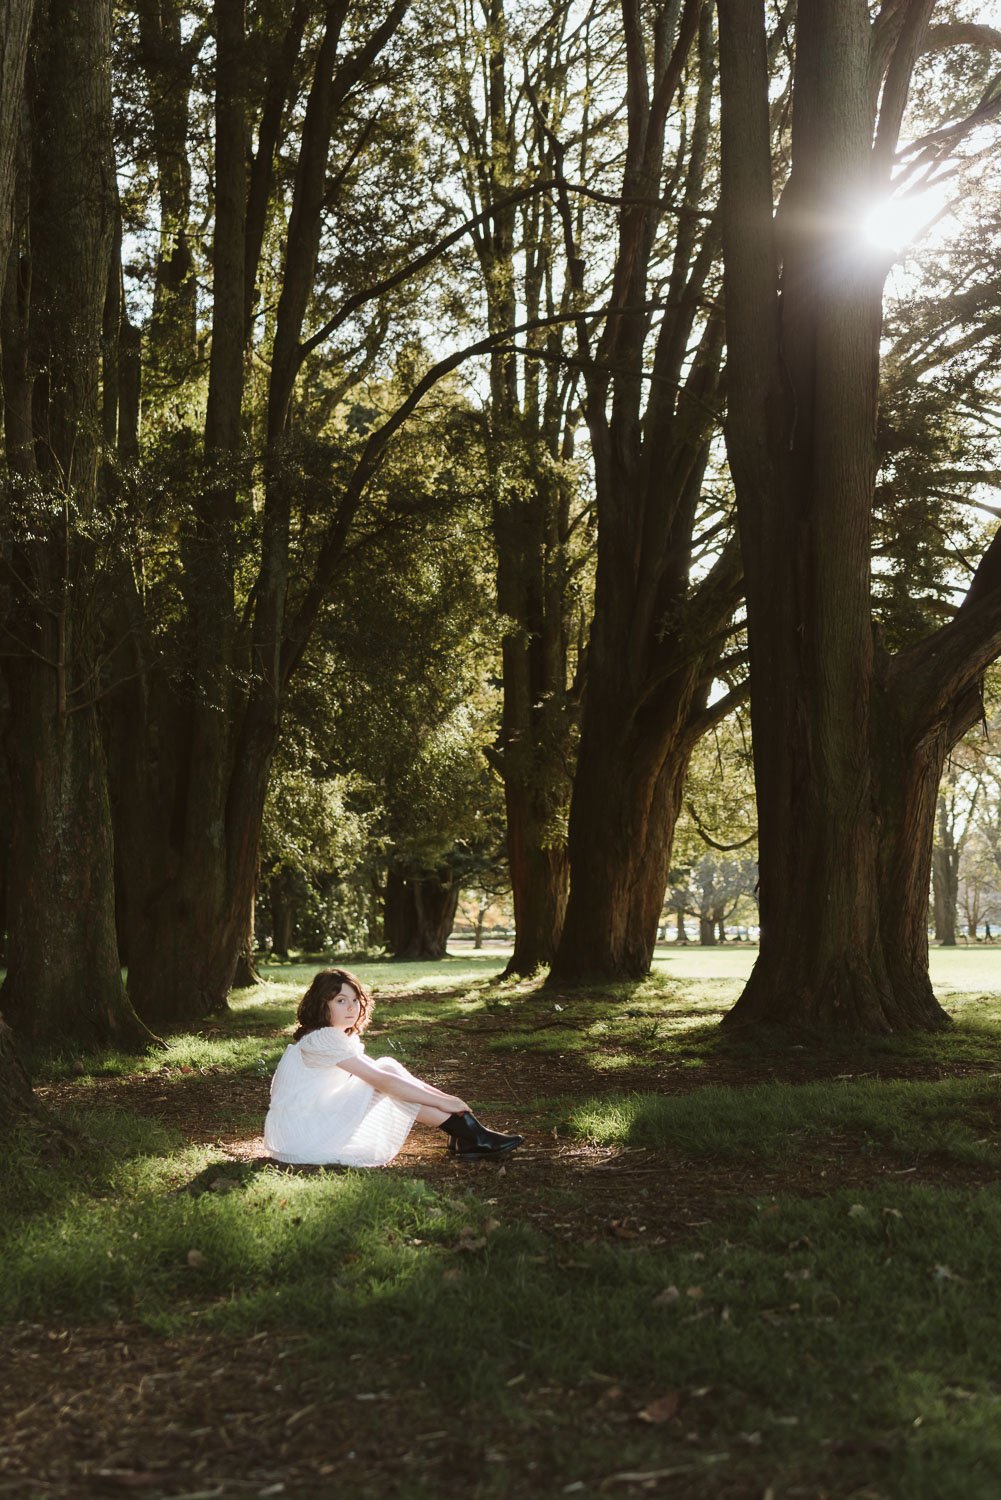 Family Photo Shoot Locations in Auckland - Cornwall Park wooded.jpg